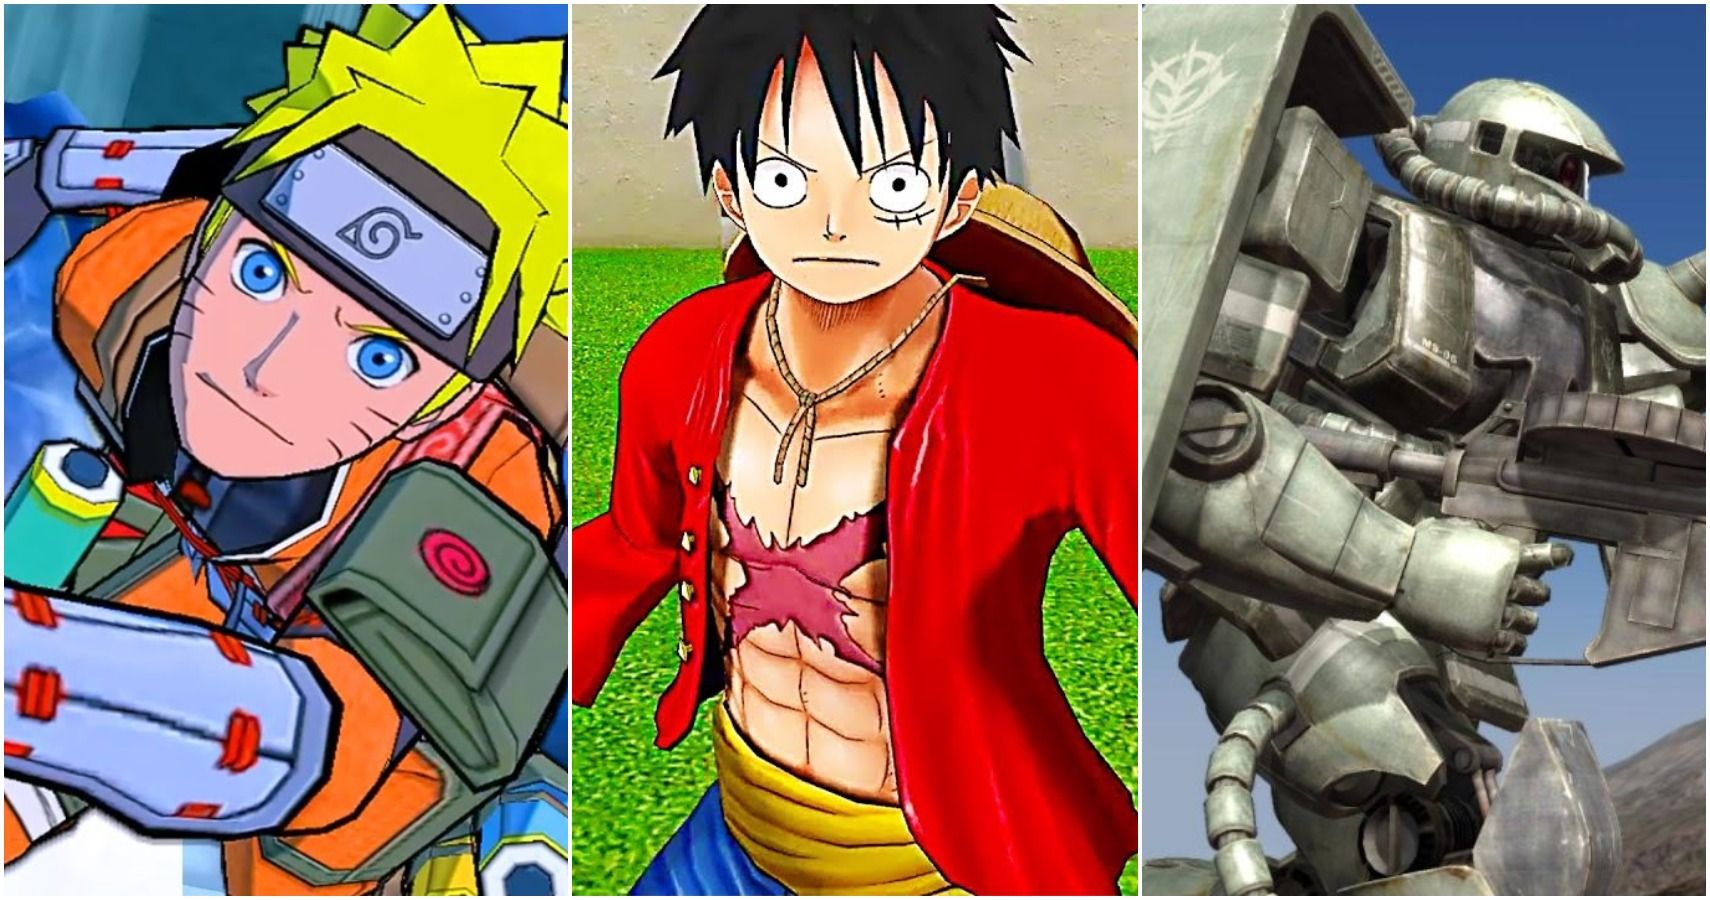 10 Worst Anime Games Ever Made (According To Metacritic)